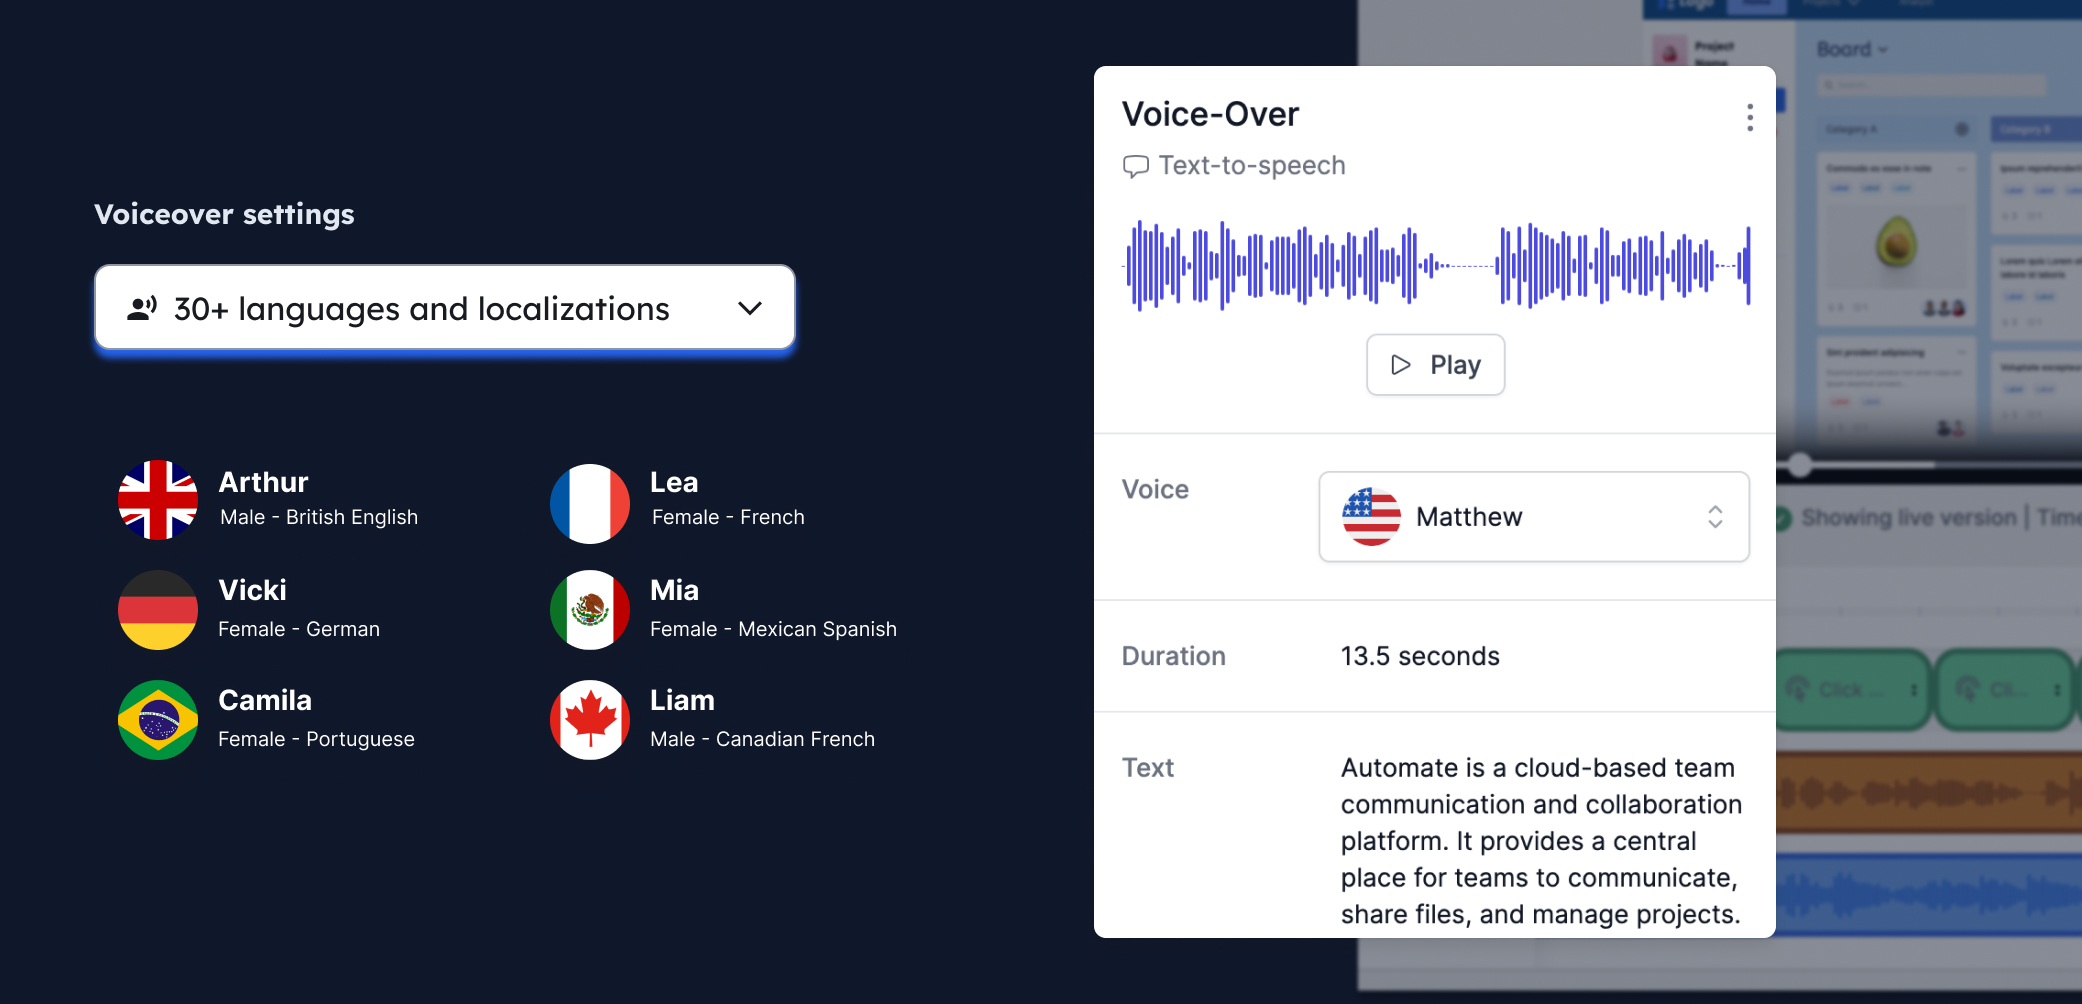 No mics, video camera or expensive recording equipment. Add text-to-speech voiceover and choose from over 30 voices in different languages and dialects. 